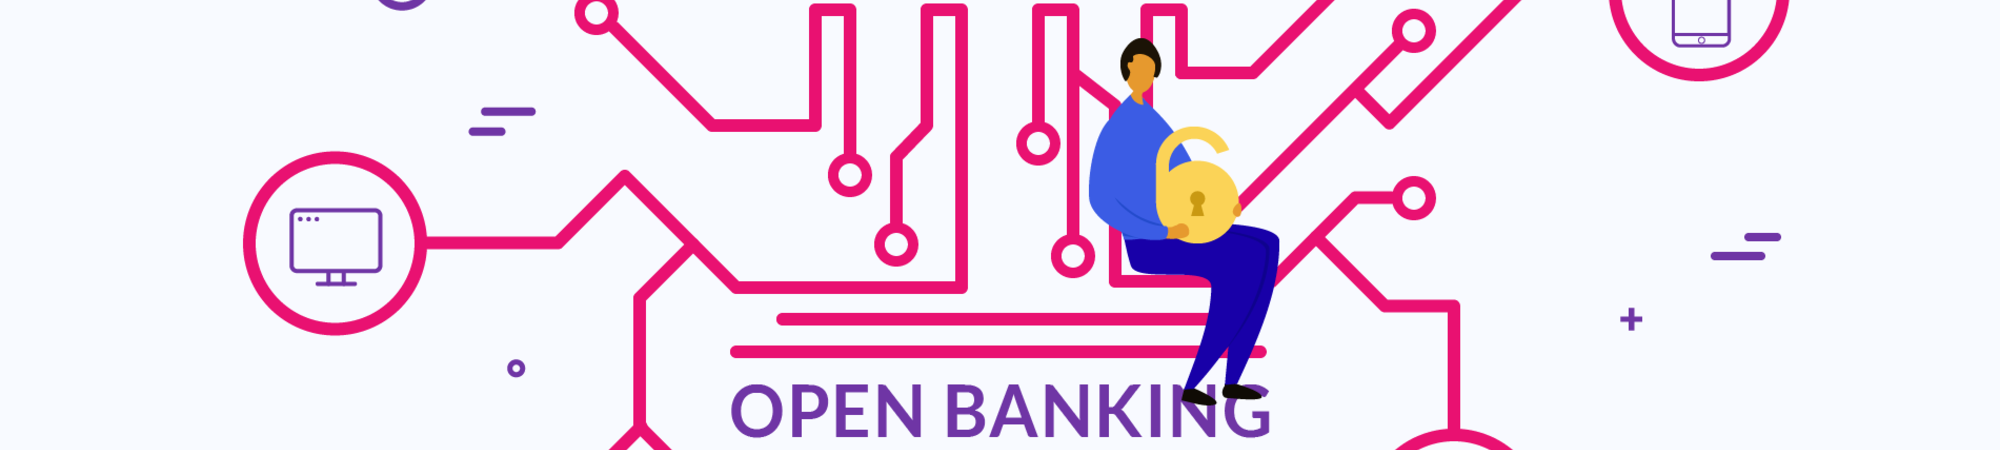 Open Banking in a Nut Shell